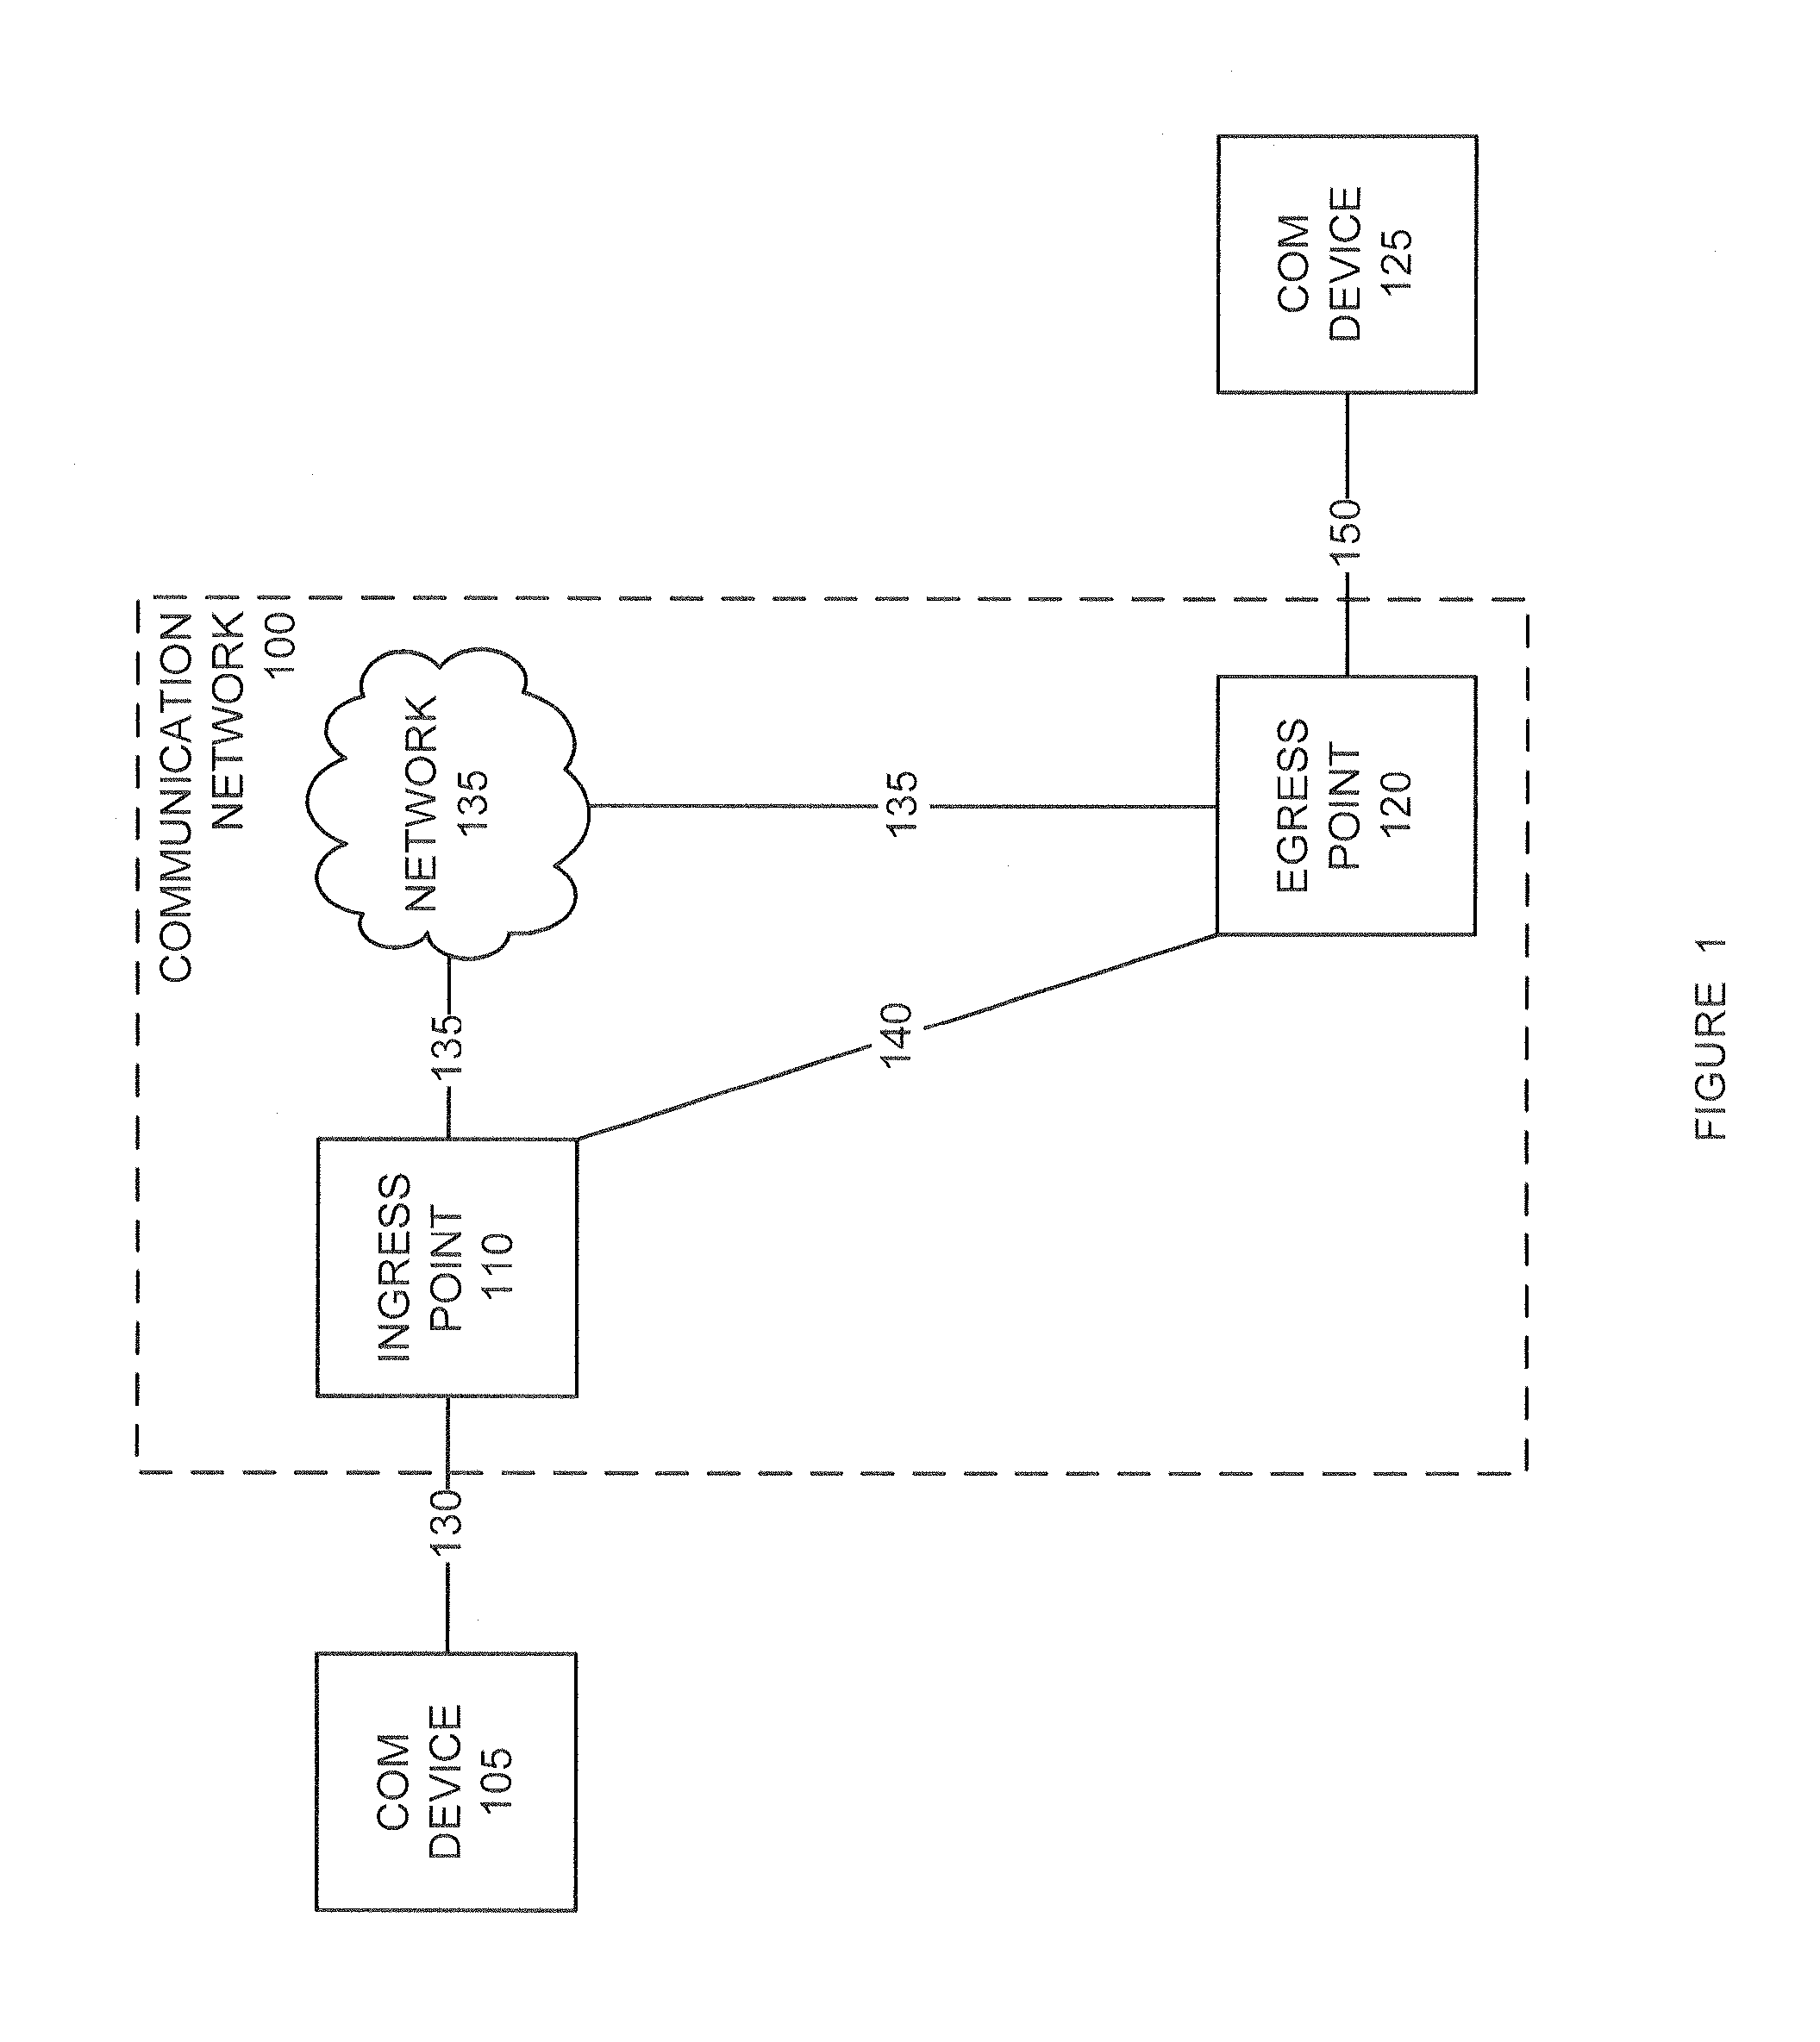 Method and system to detect a security event in a packet flow and block the packet flow at an egress point in a communication network